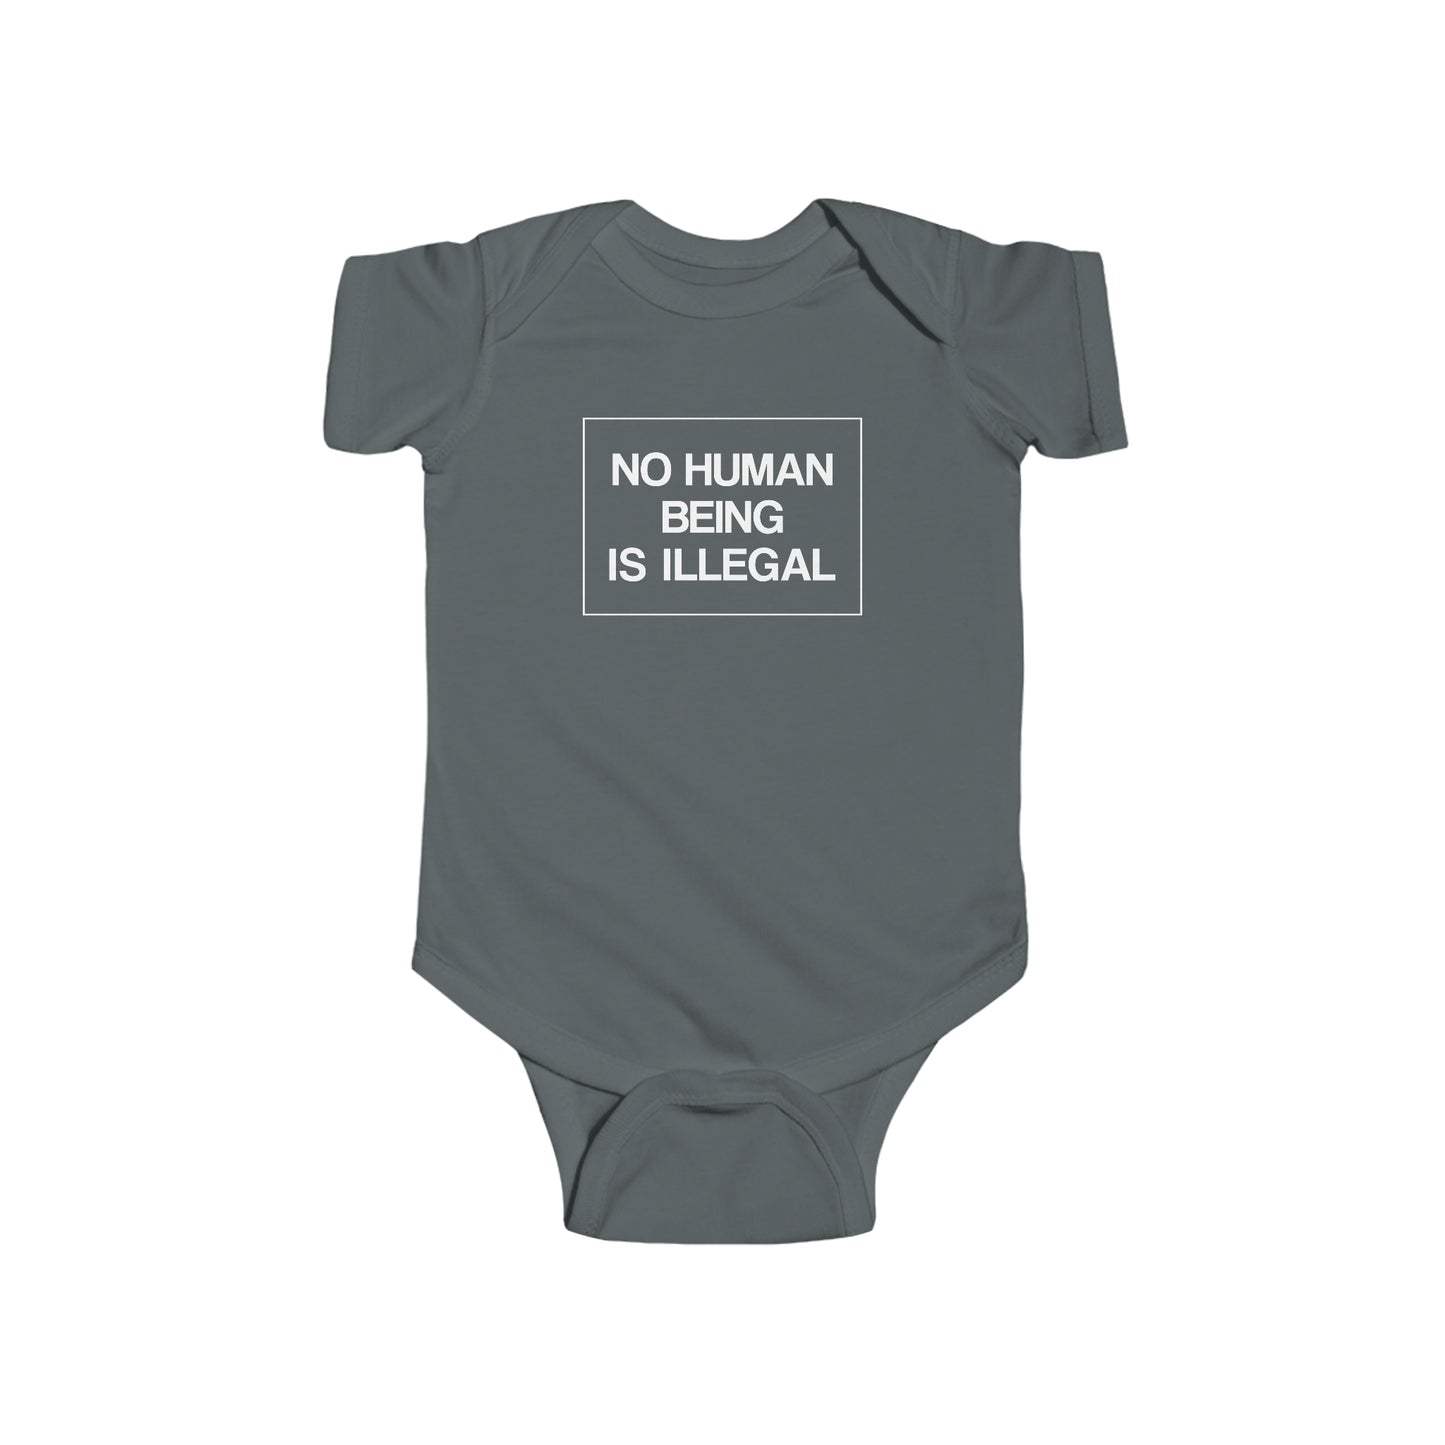 “No Human Being is Illegal” Infant Onesie